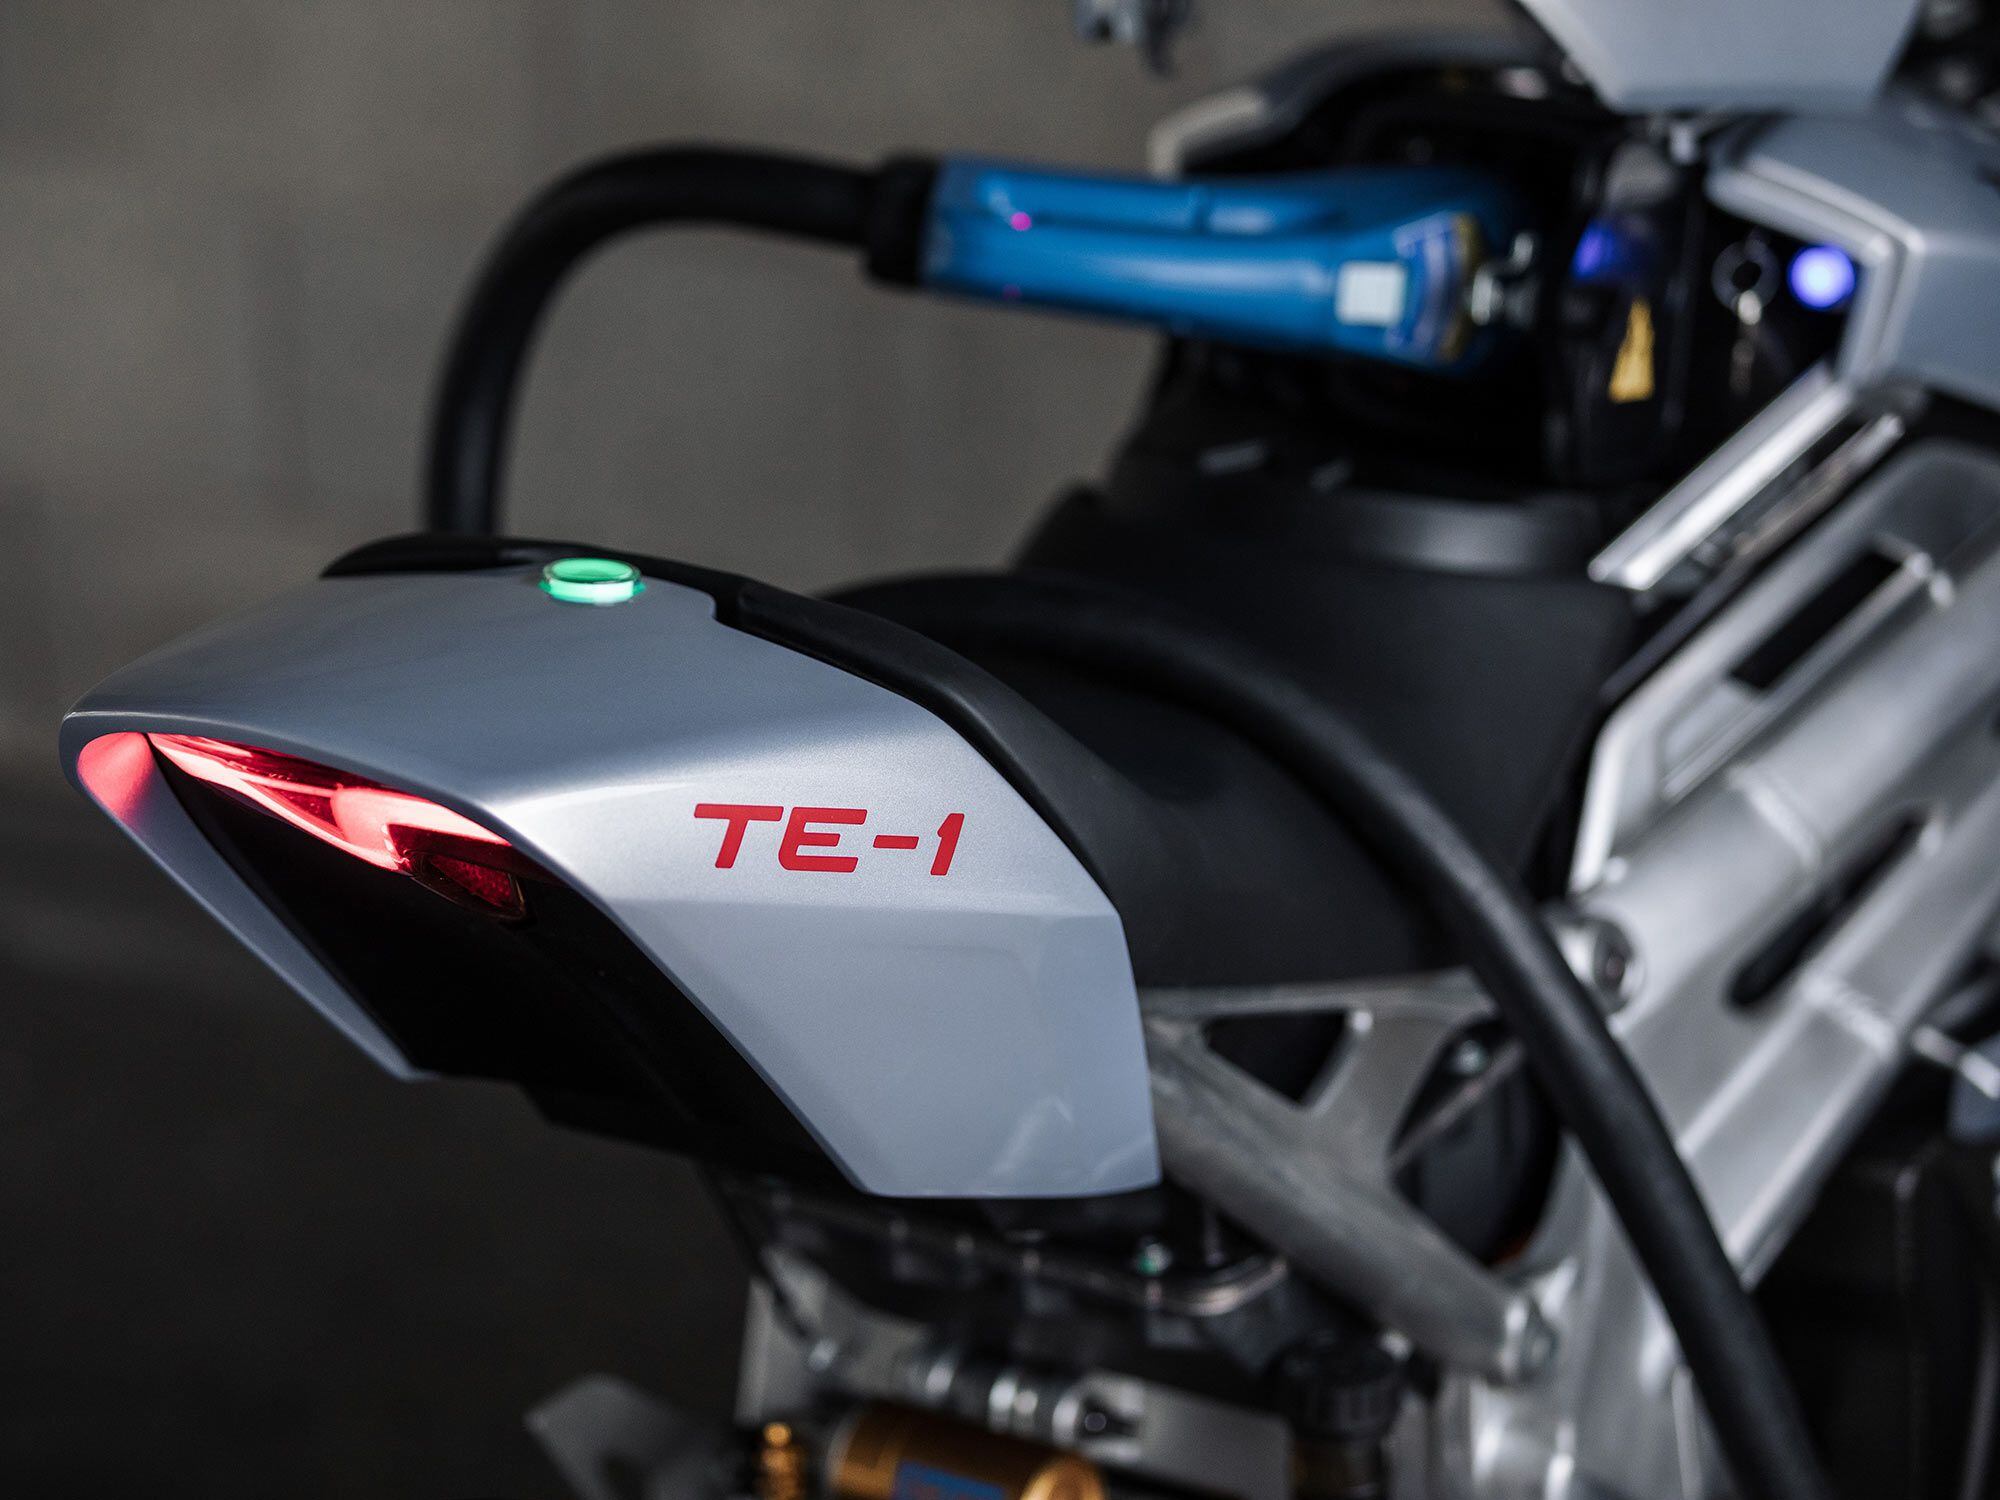 Charging from 0 to 80 percent only takes 20 minutes, says Triumph.